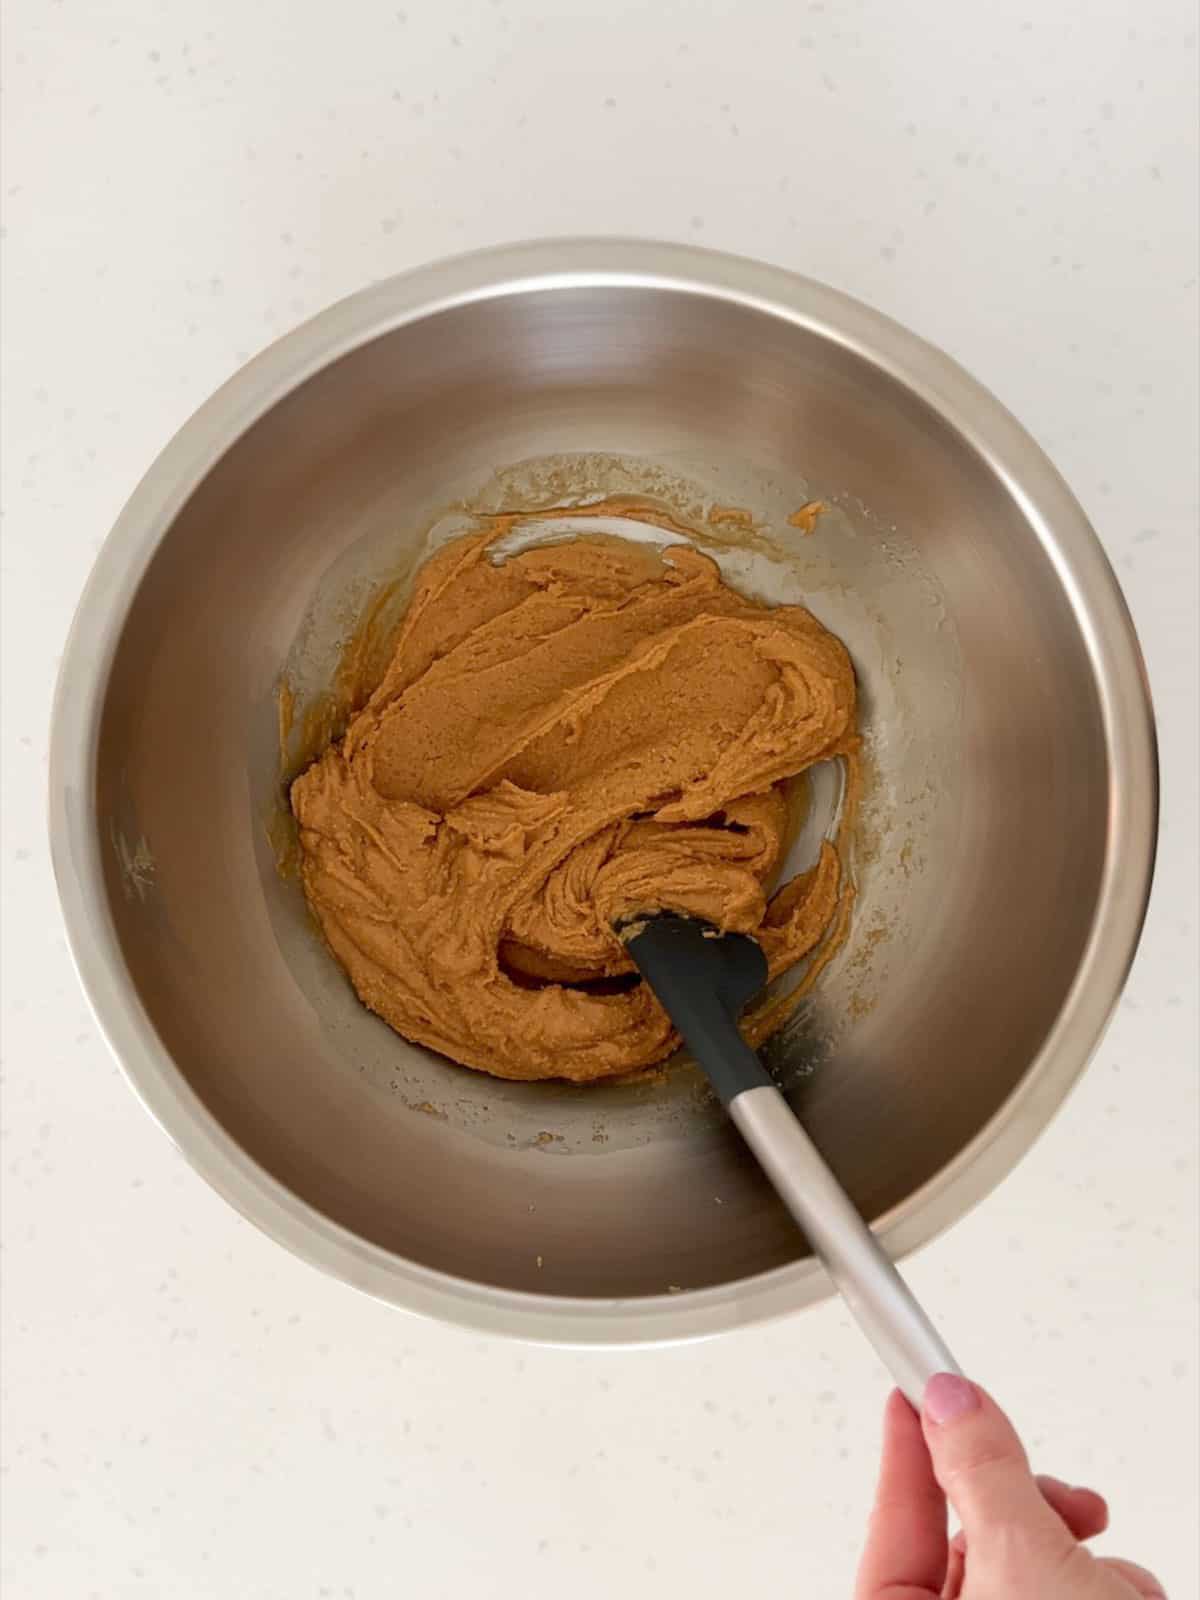 Peanut butter and maple syrup mixed together in a bowl.